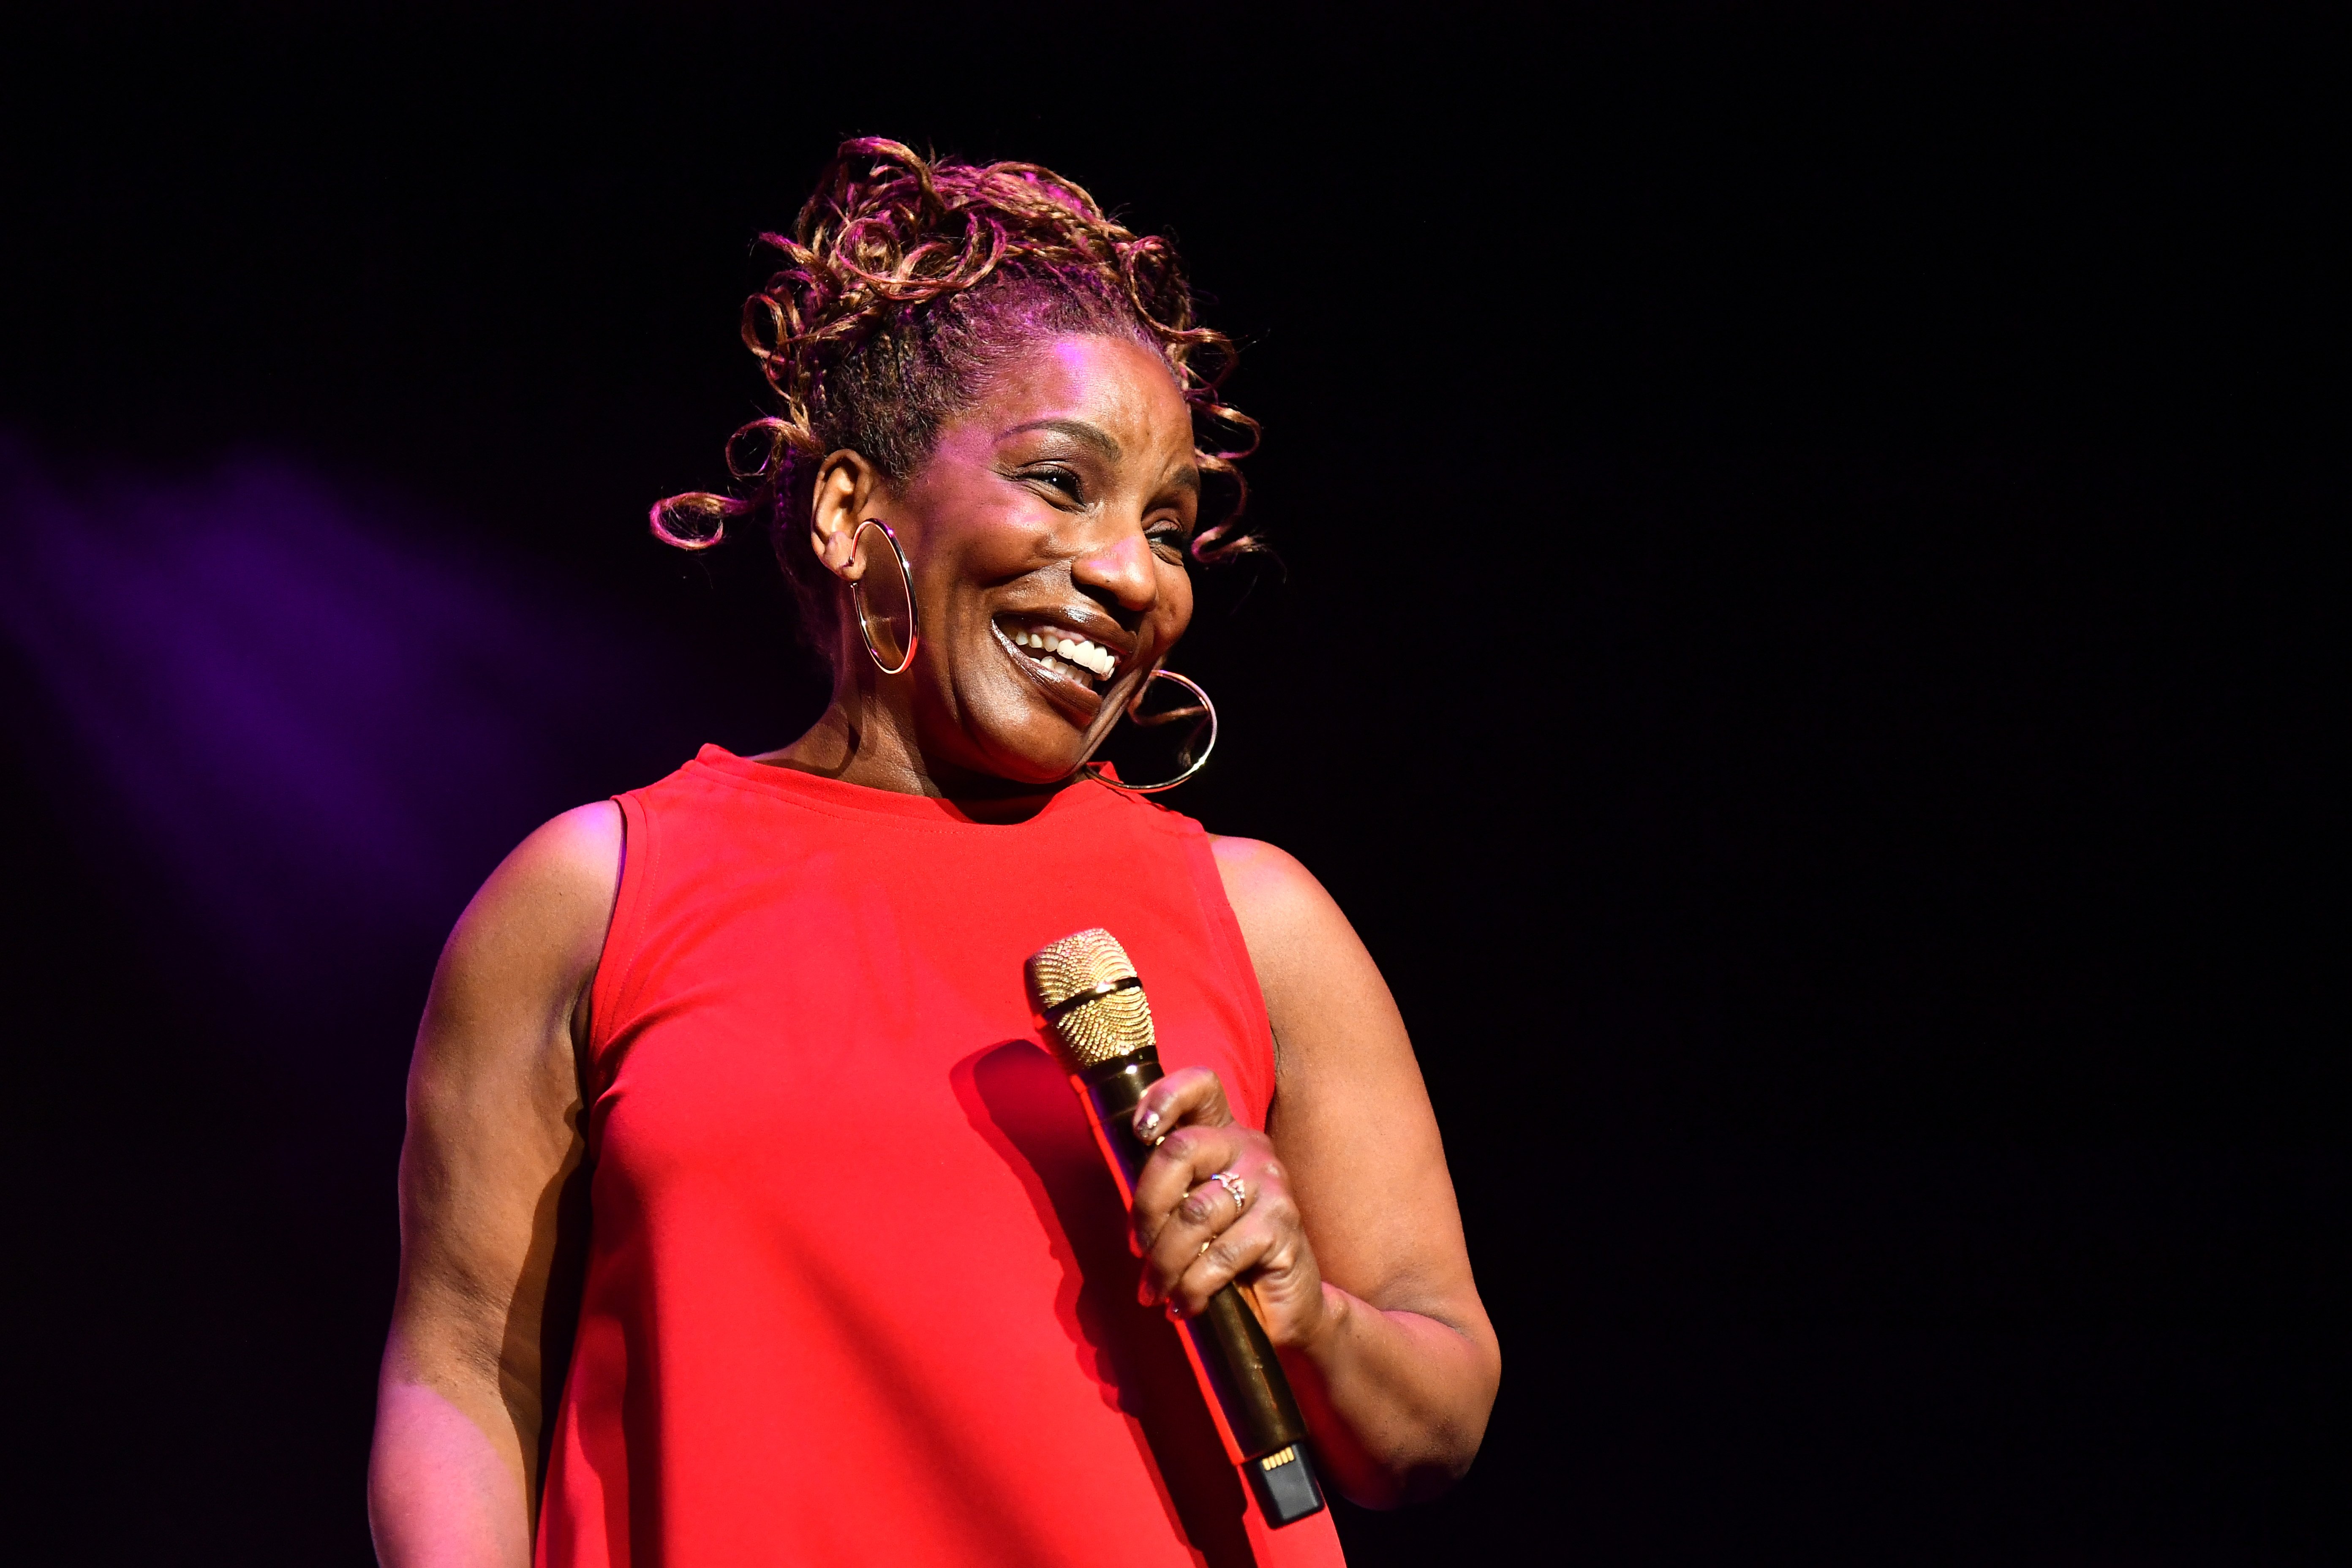 Stephanie Mills performs onstage during the 2019 Black Friday R&B Mega Fest at State Farm Arena on November 29, 2019 in Atlanta, Georgia. I Image: Getty Images.